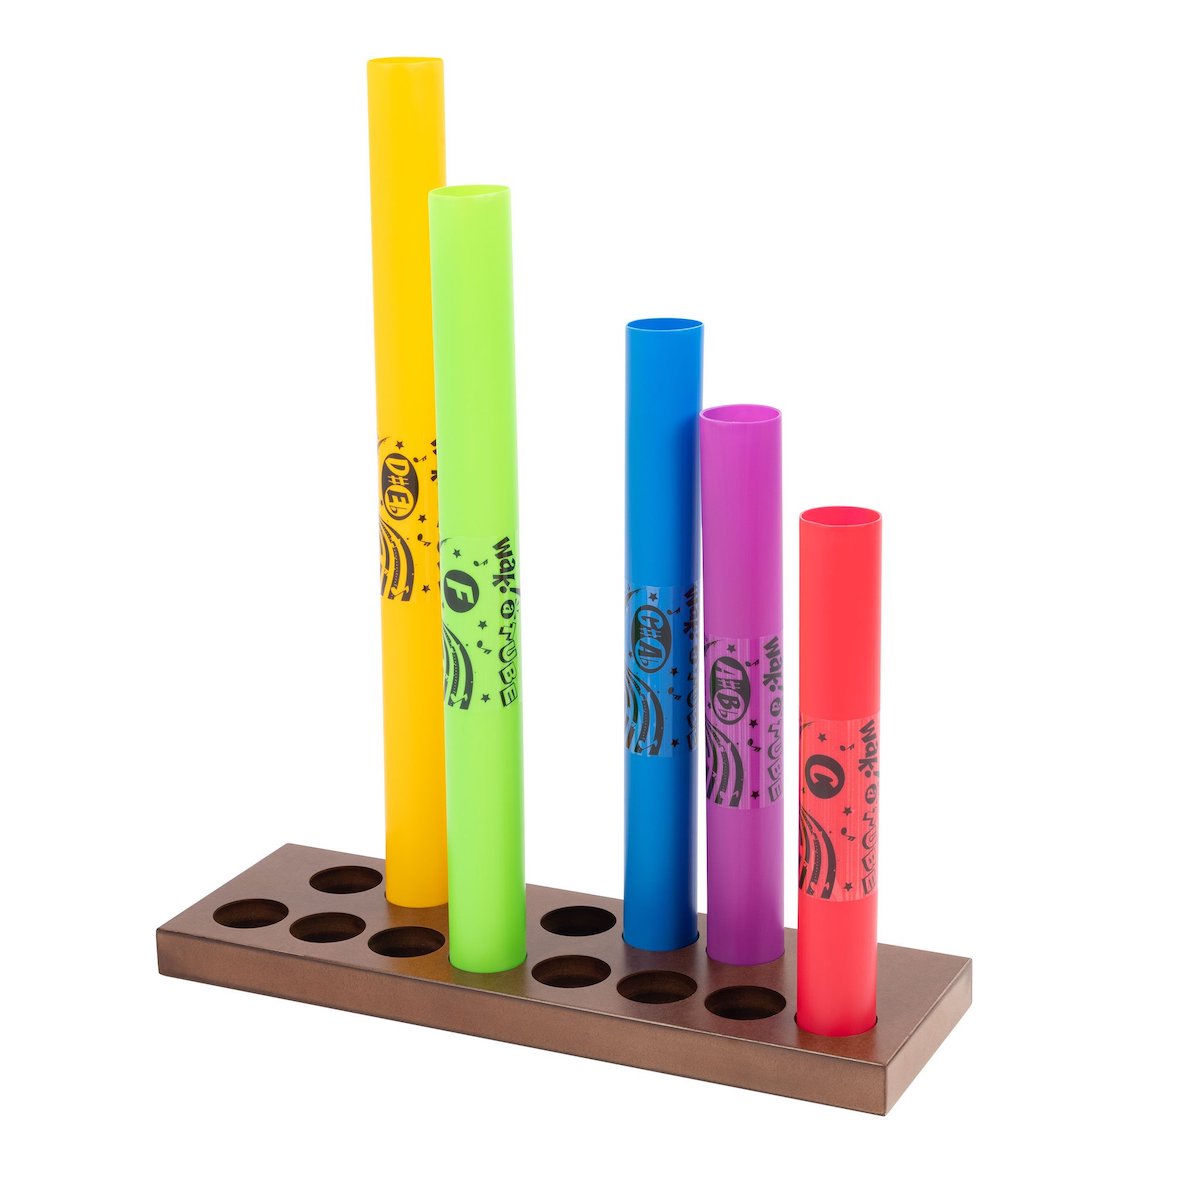 Wak-a-Tubes Stand - holds up to 13 tubes